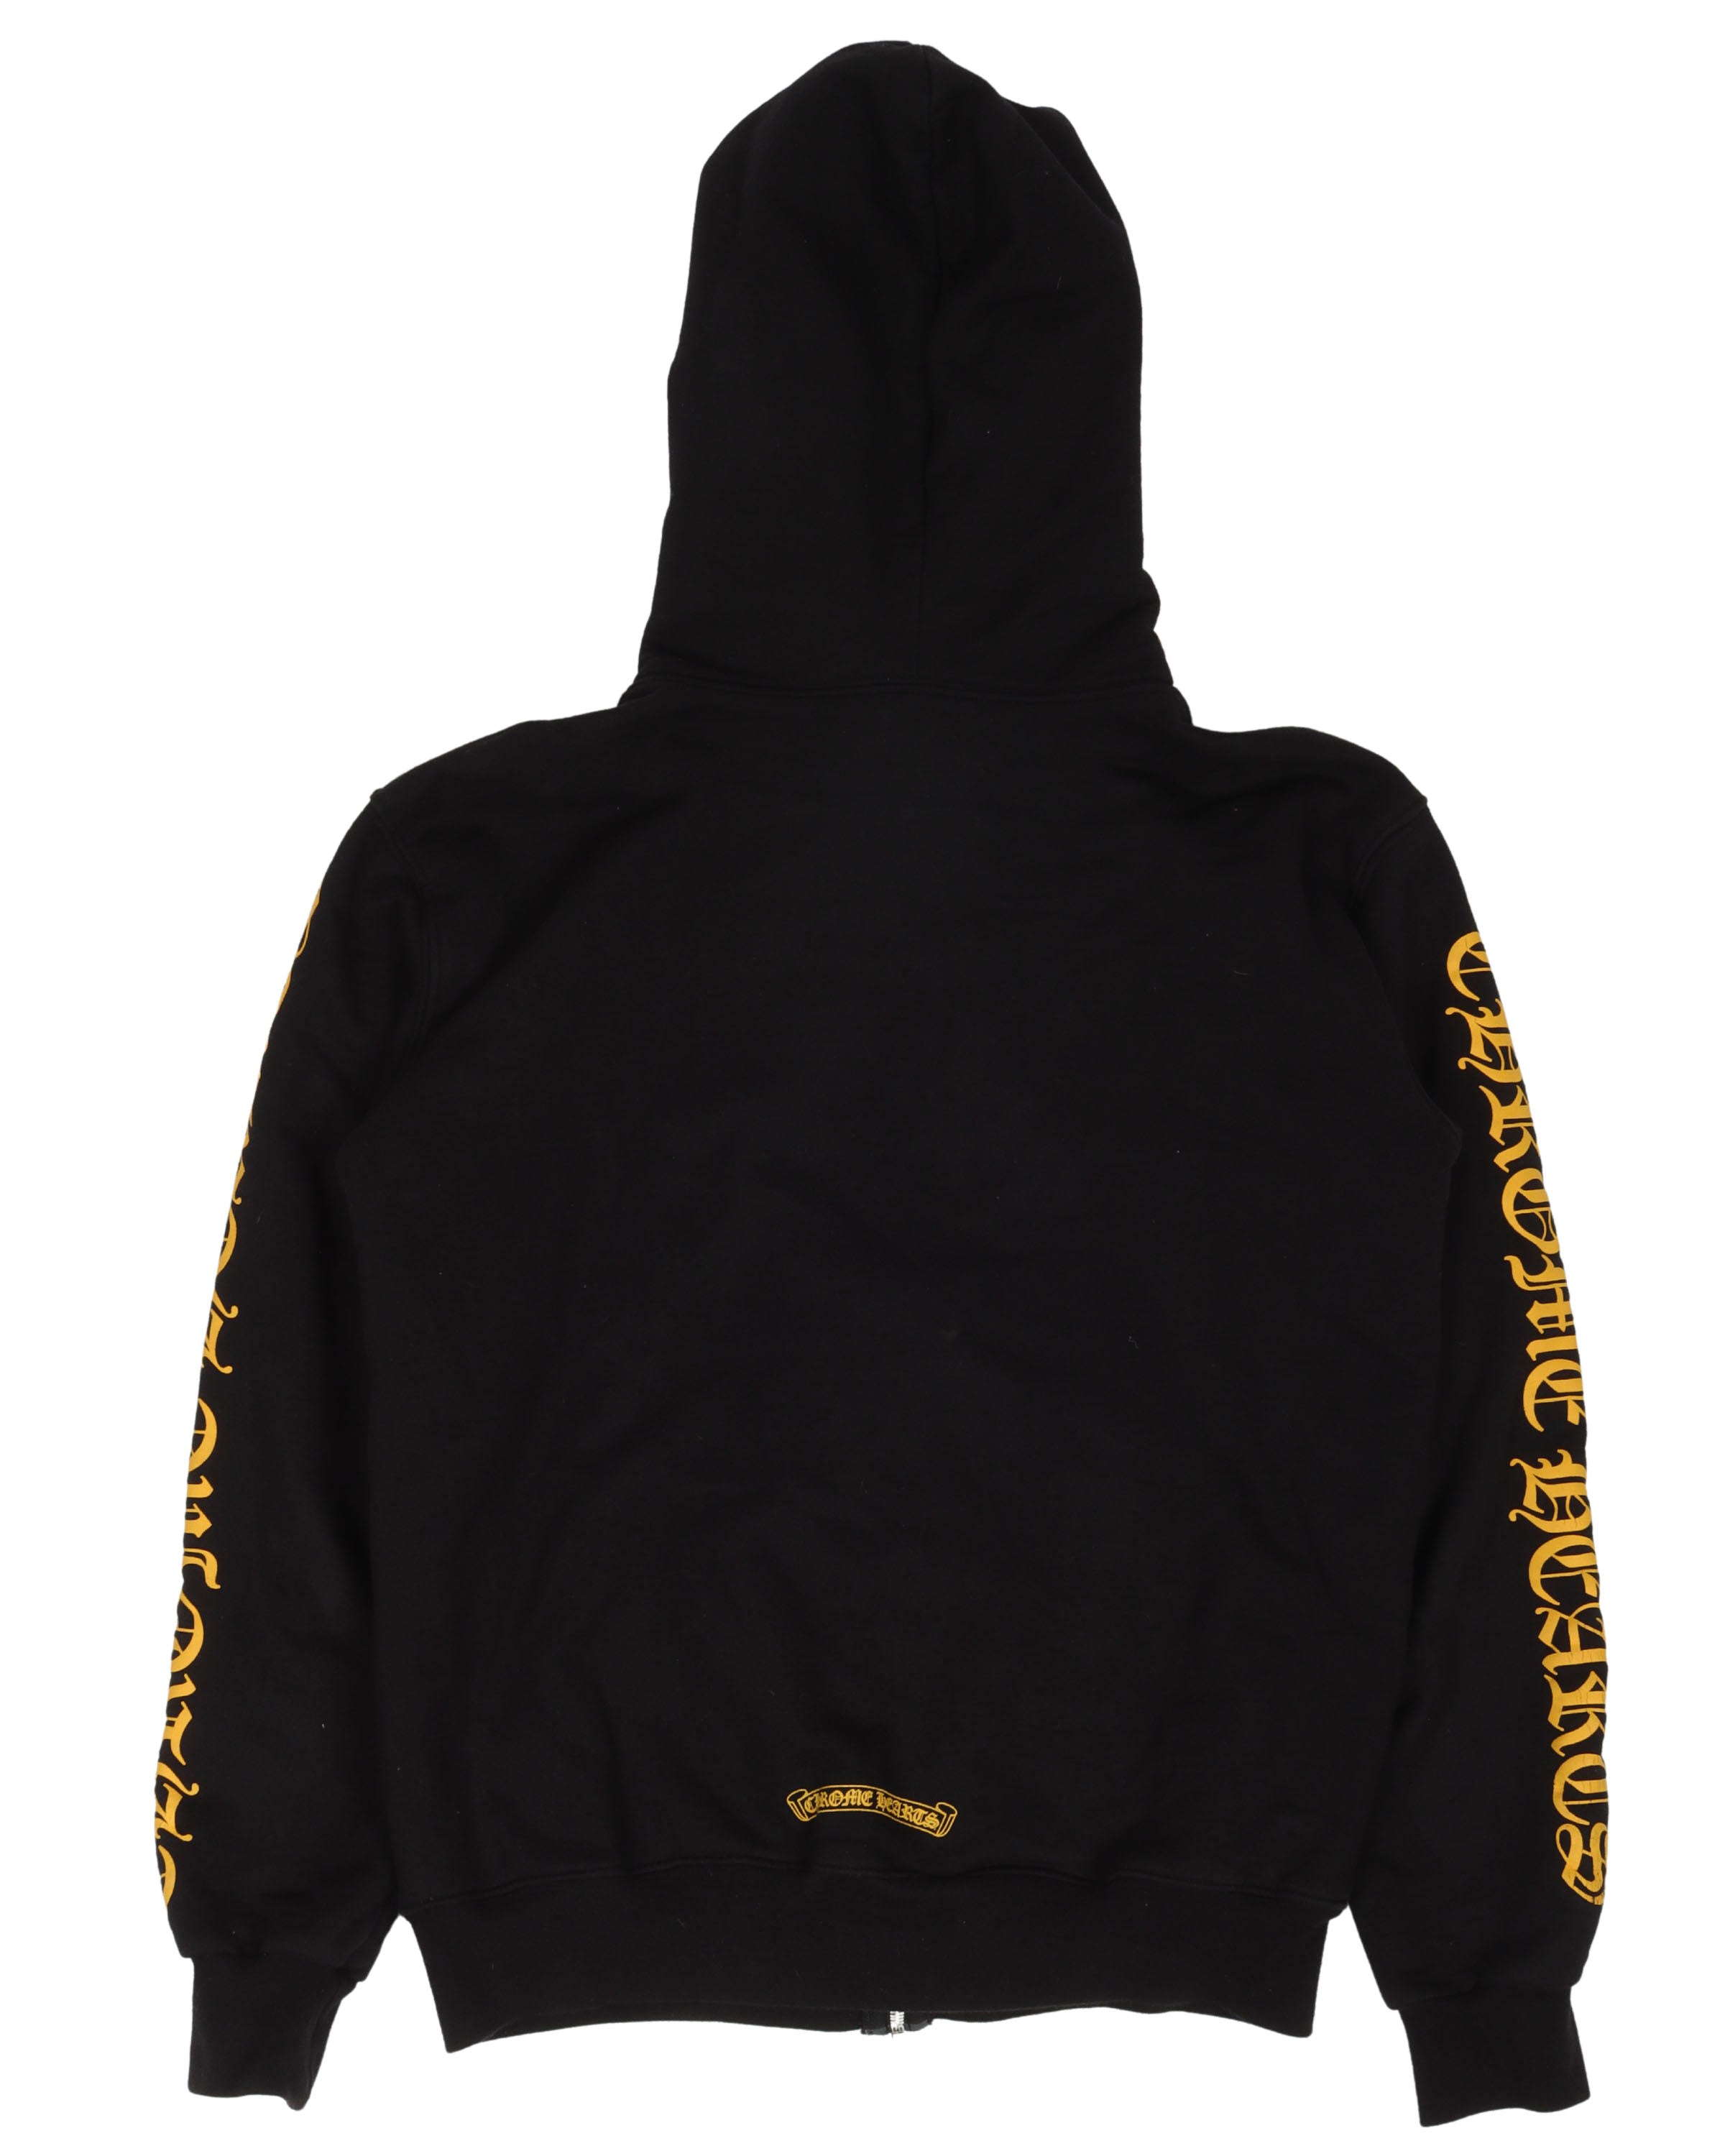 Dagger Thermal Zip Up